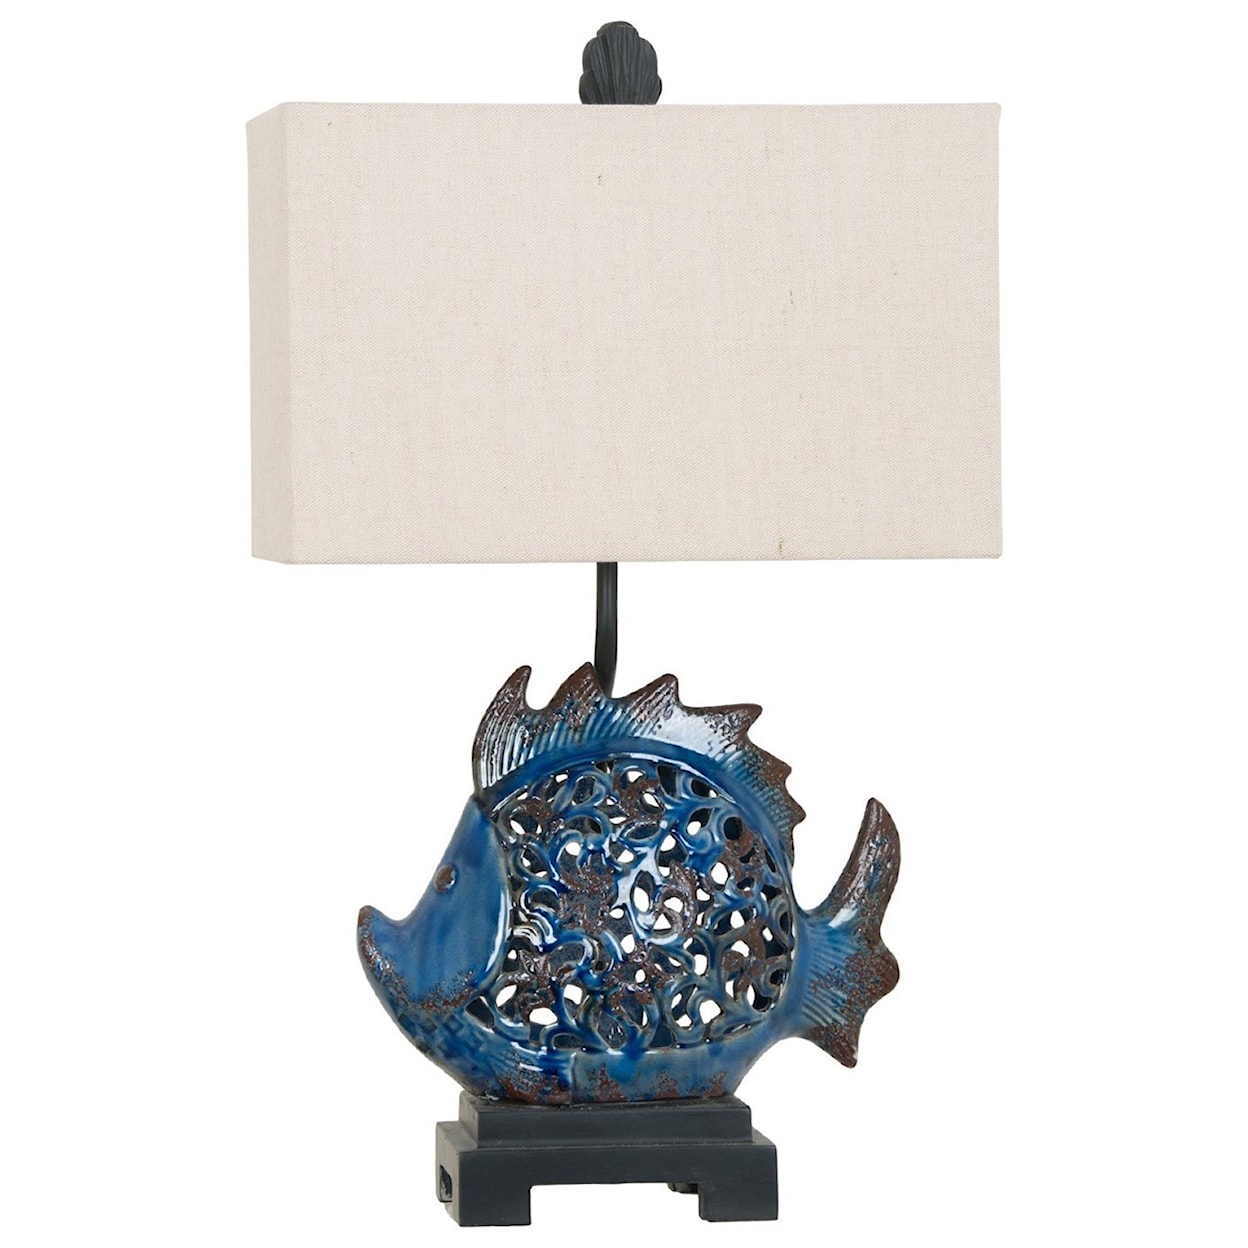 Crestview Collection Lighting Scales Table Lamp